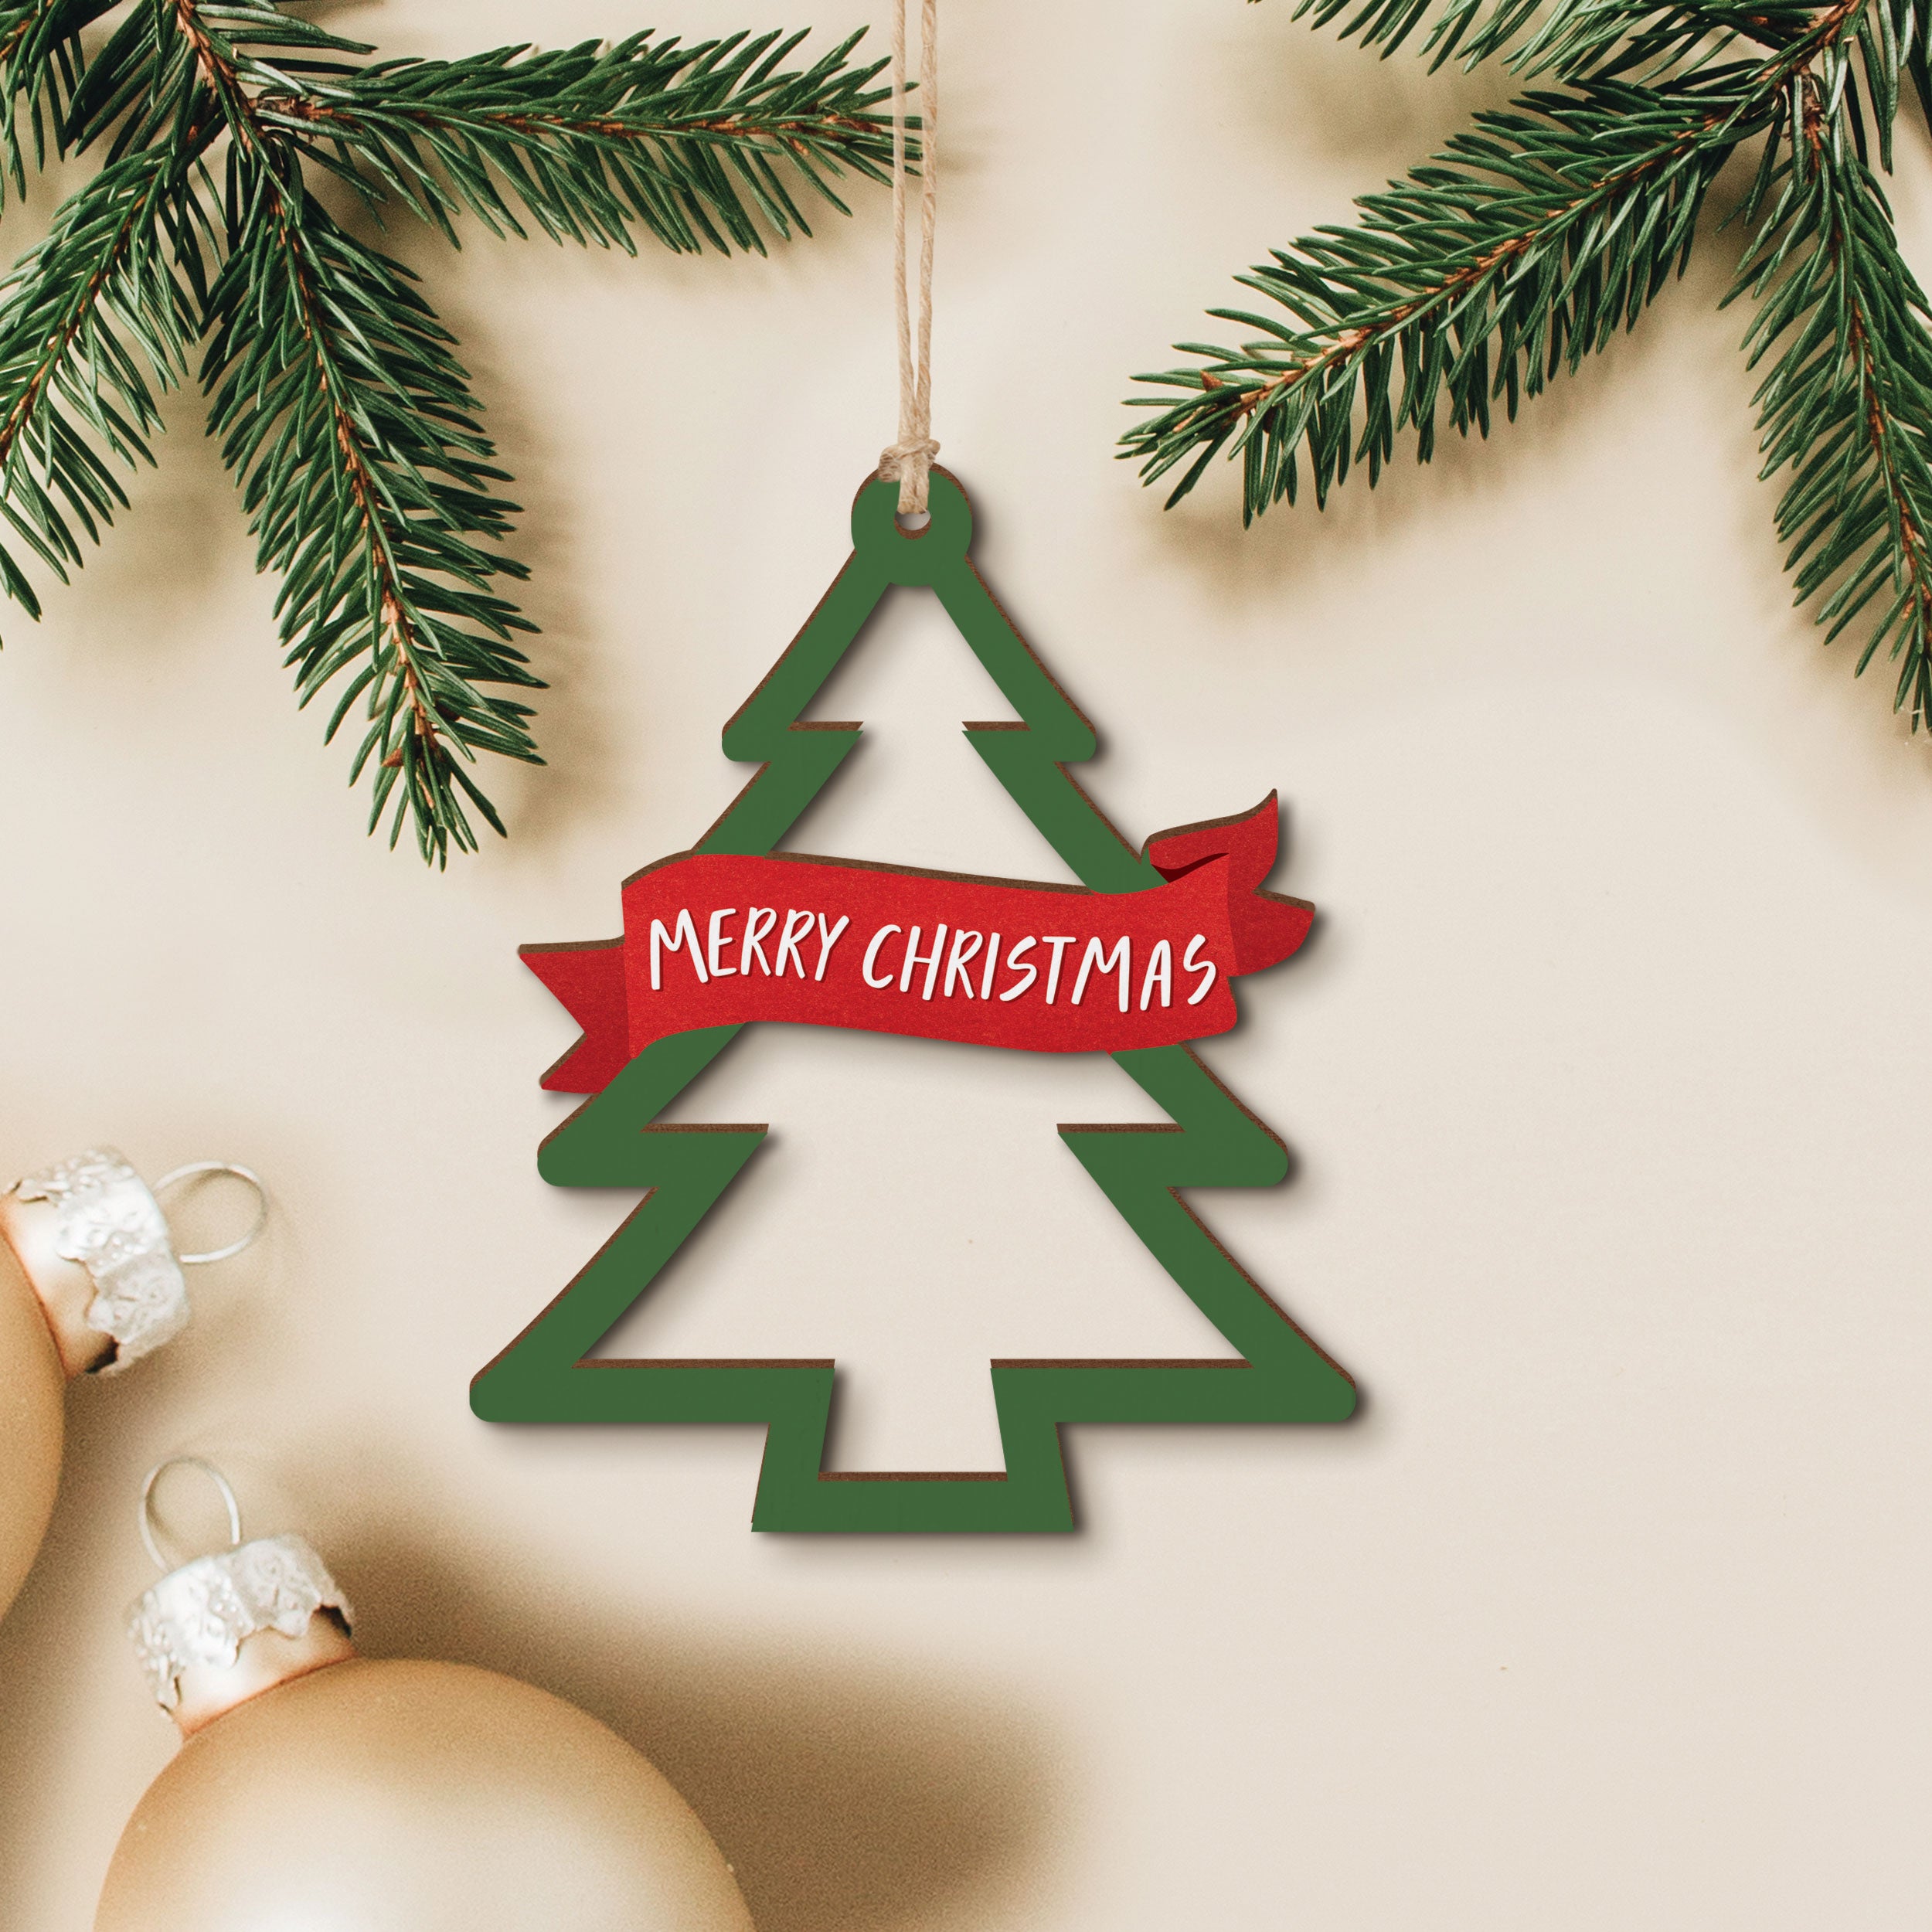 Merry Christmas Cut-Out Ornament